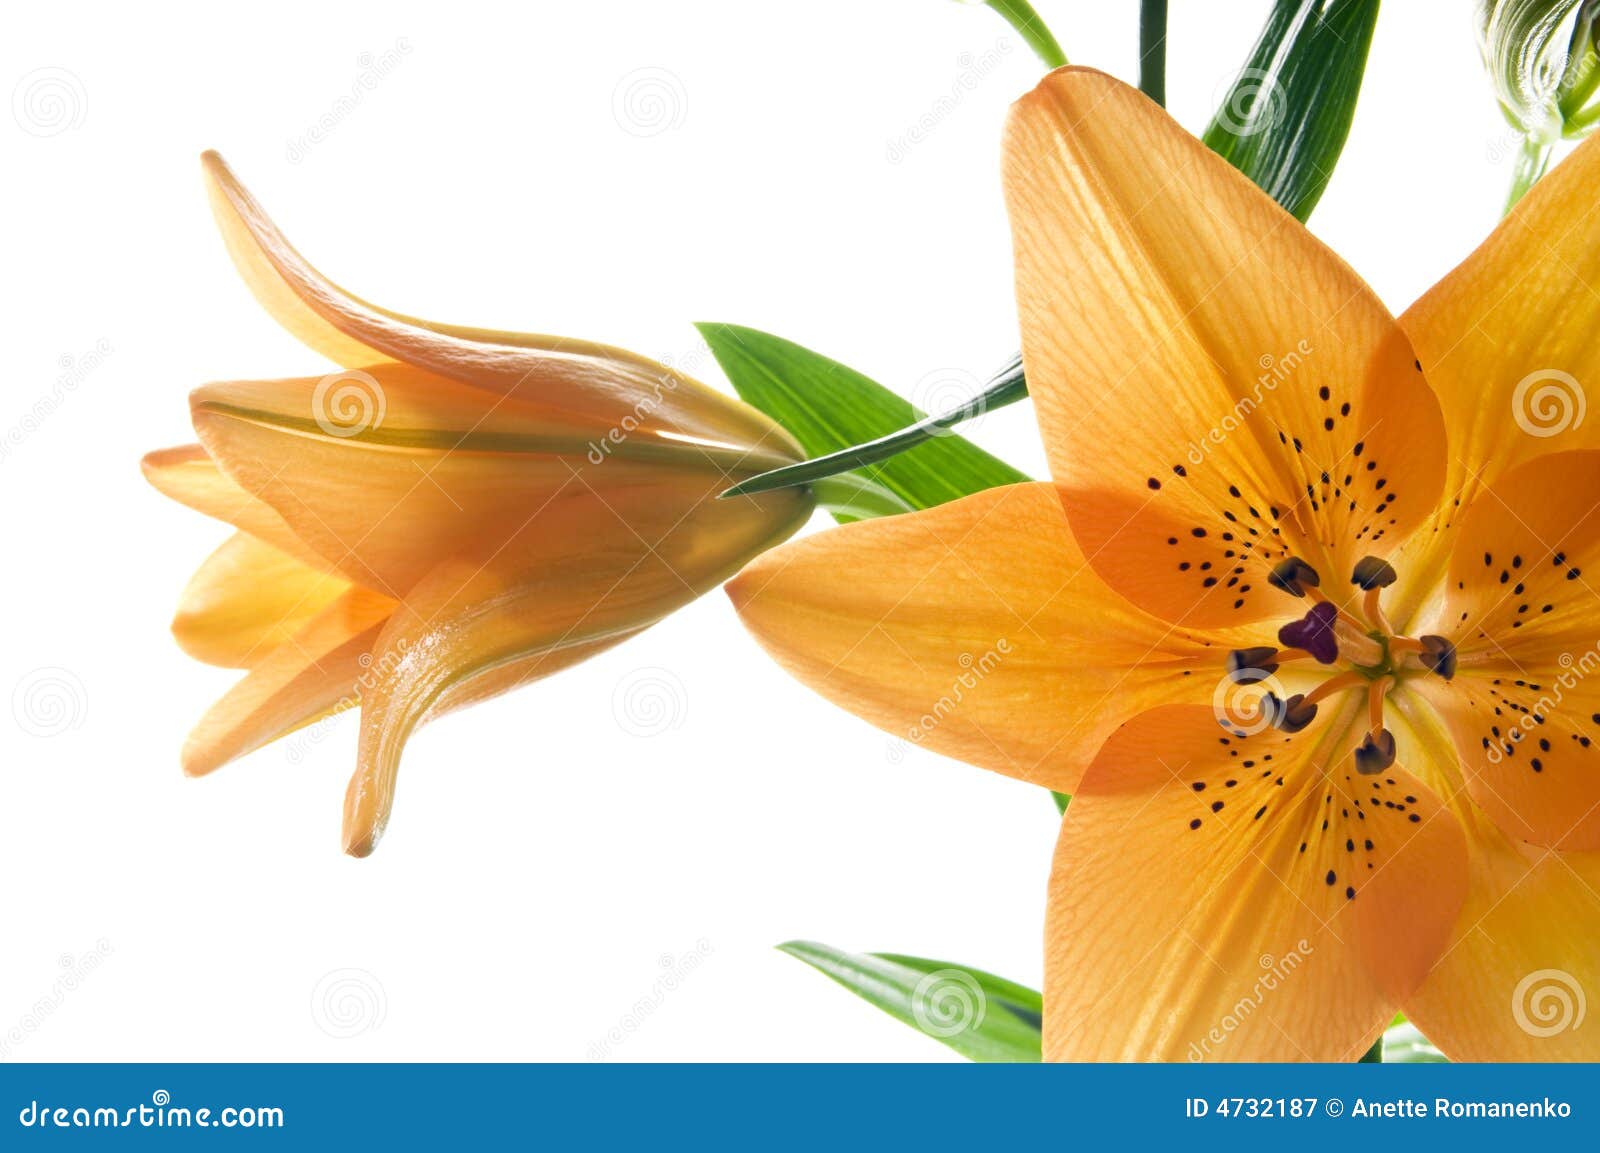 tiger lily clipart - photo #39